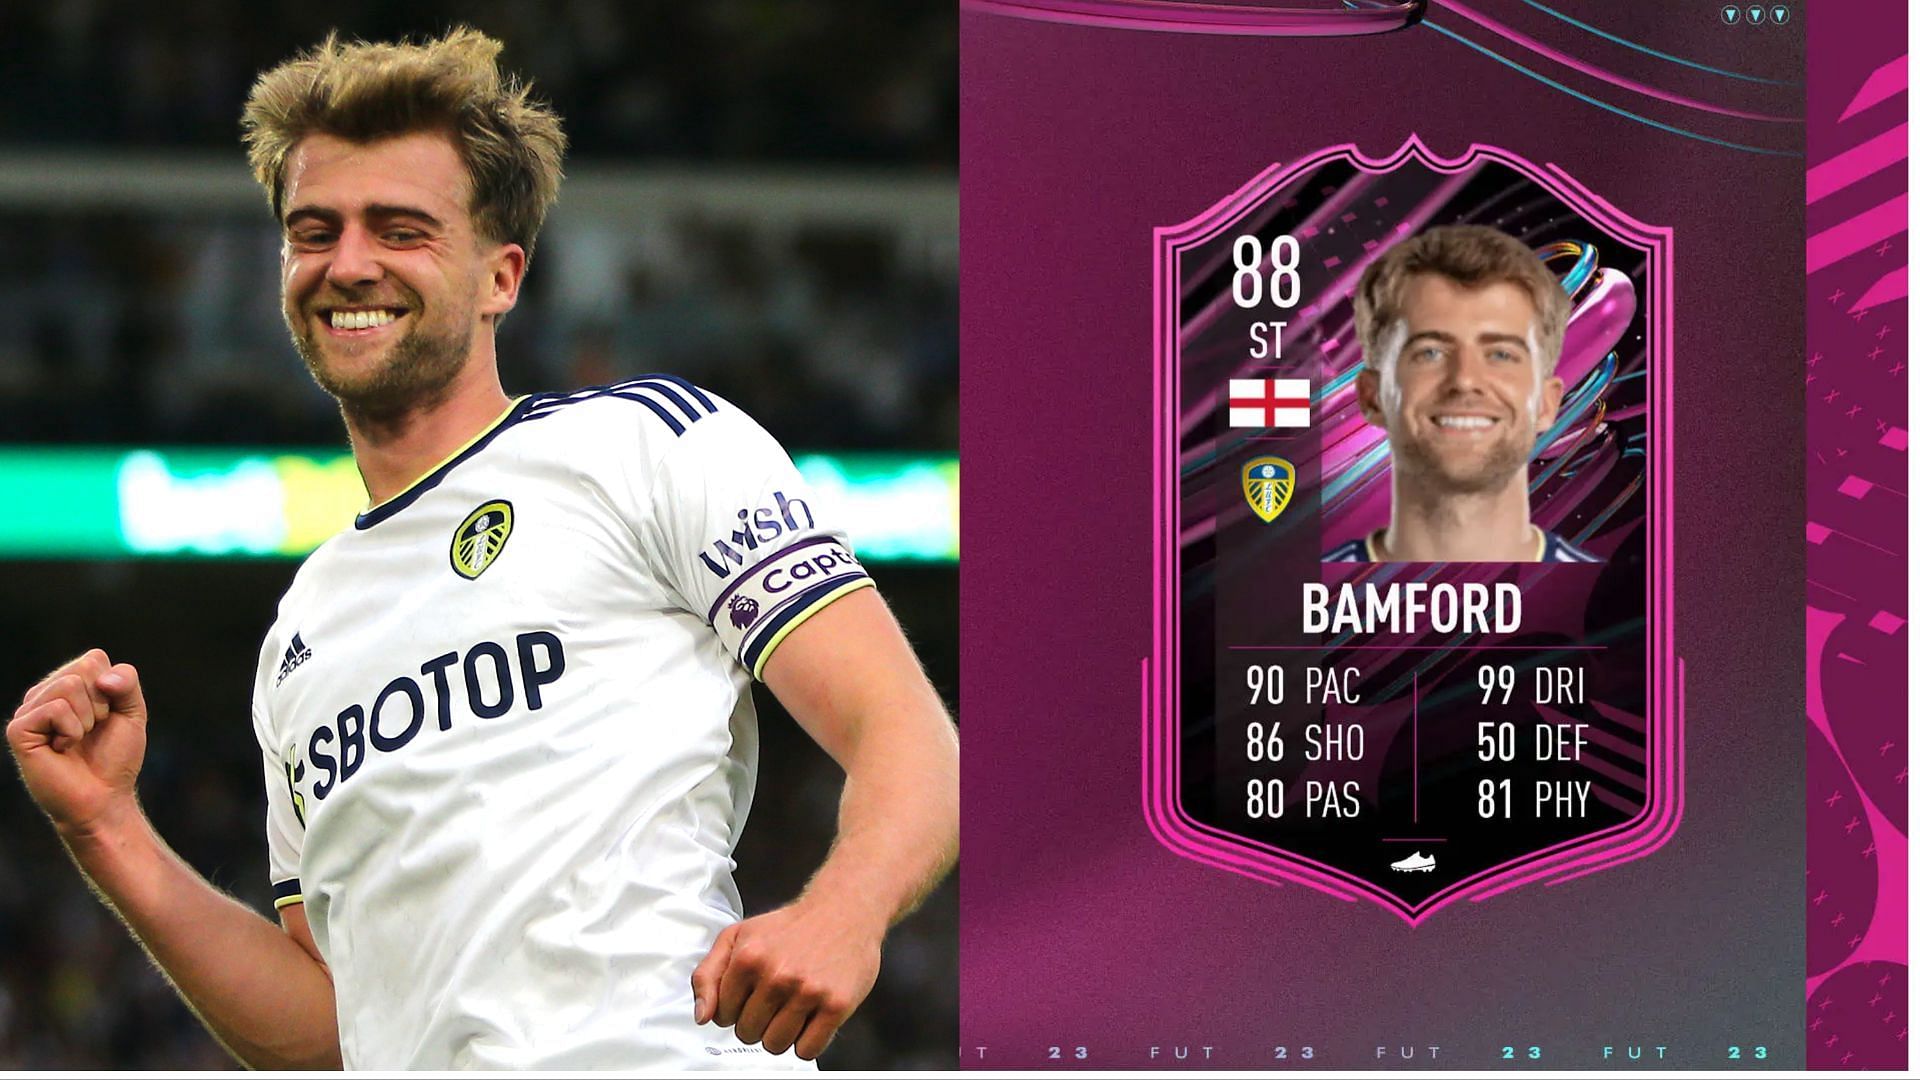 The Patrick Bamford FUT Ballers SBC is one of the best bargains ever released in FIFA 23 (Images via Getty, EA Sports)